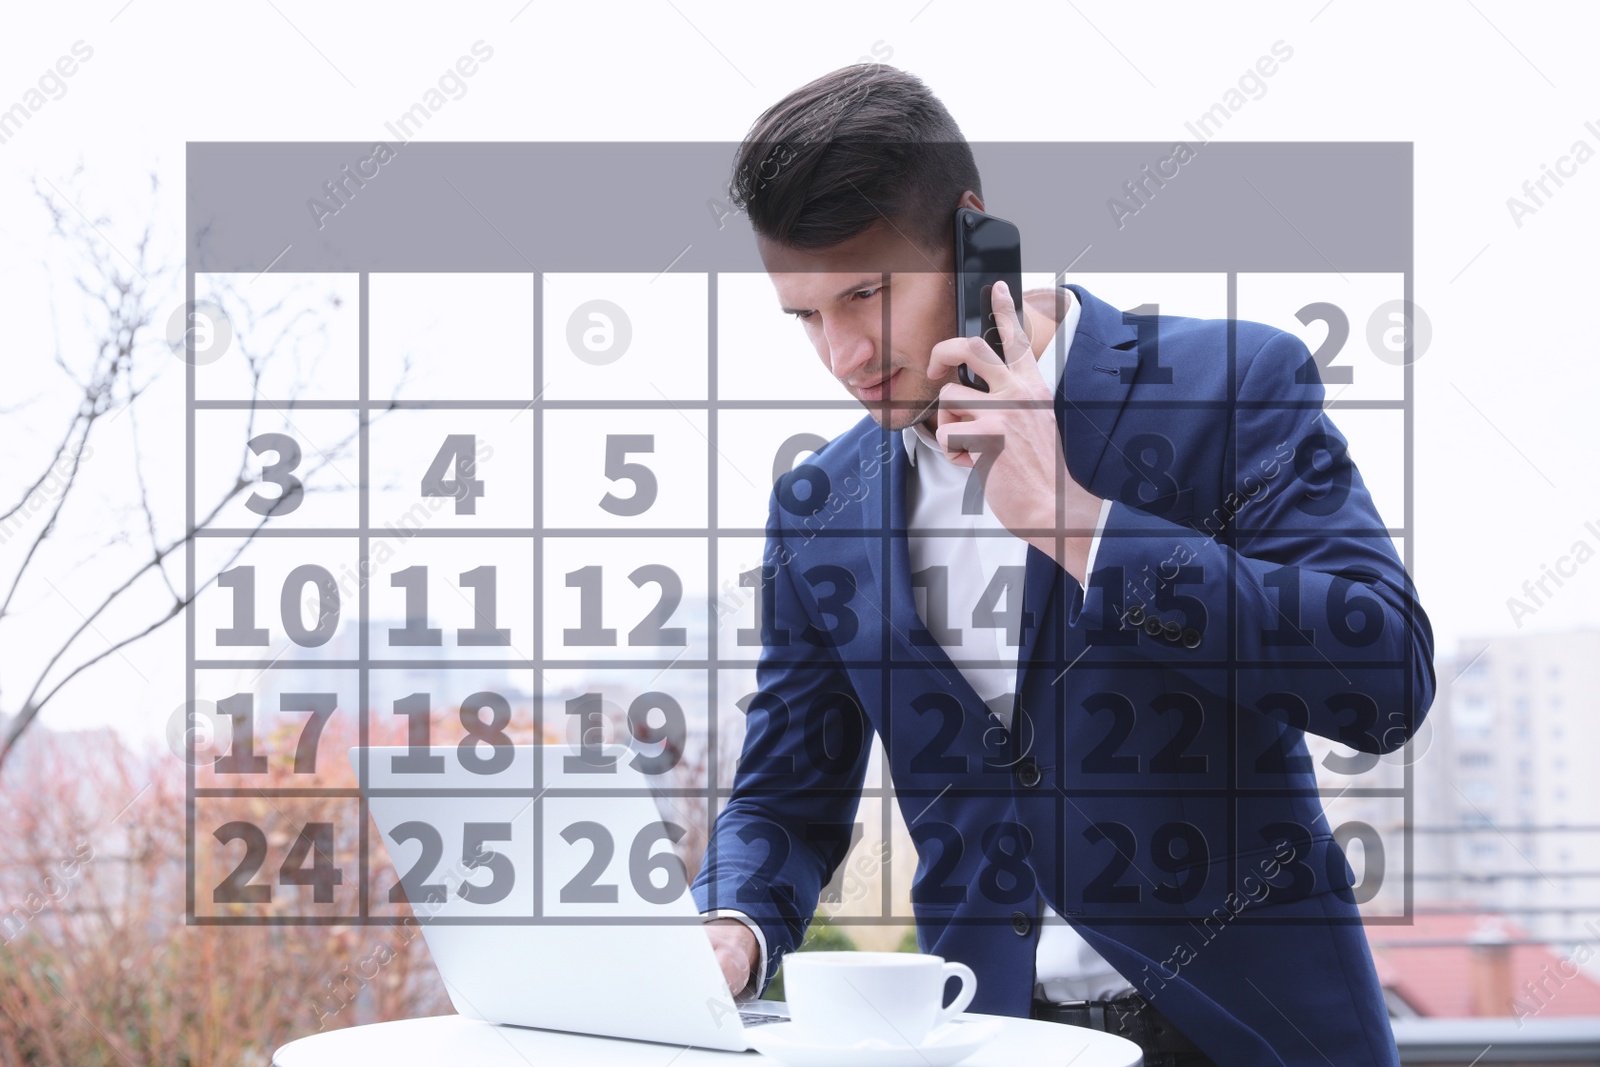 Image of Calendar and man working with laptop in outdoor cafe